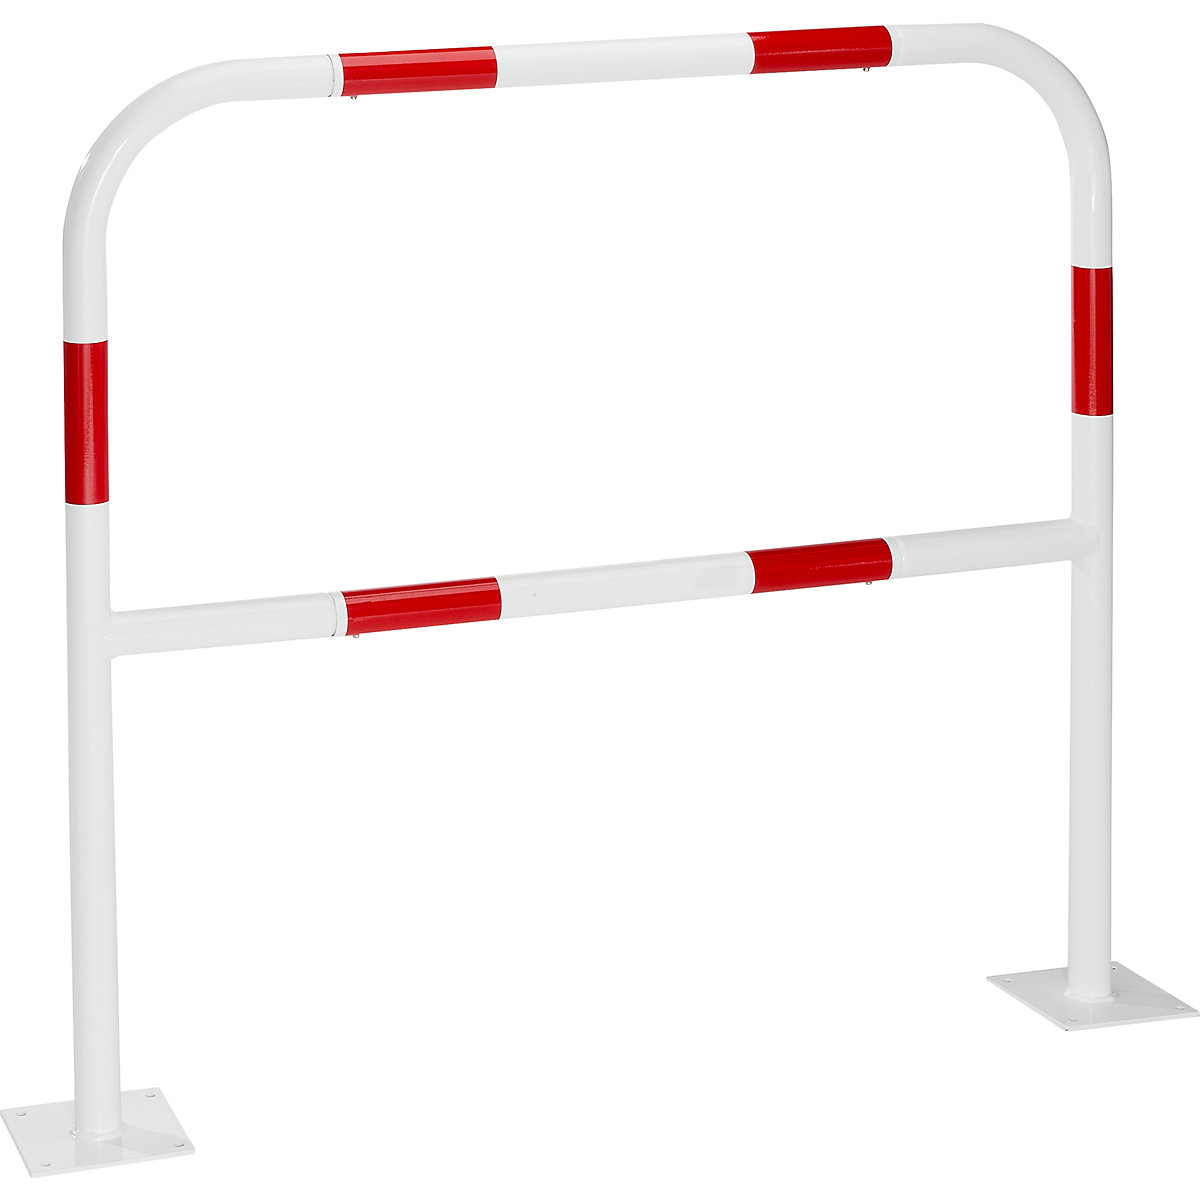 Safety rail for danger zones, to bolt in place, red / white, width 1000 mm-12